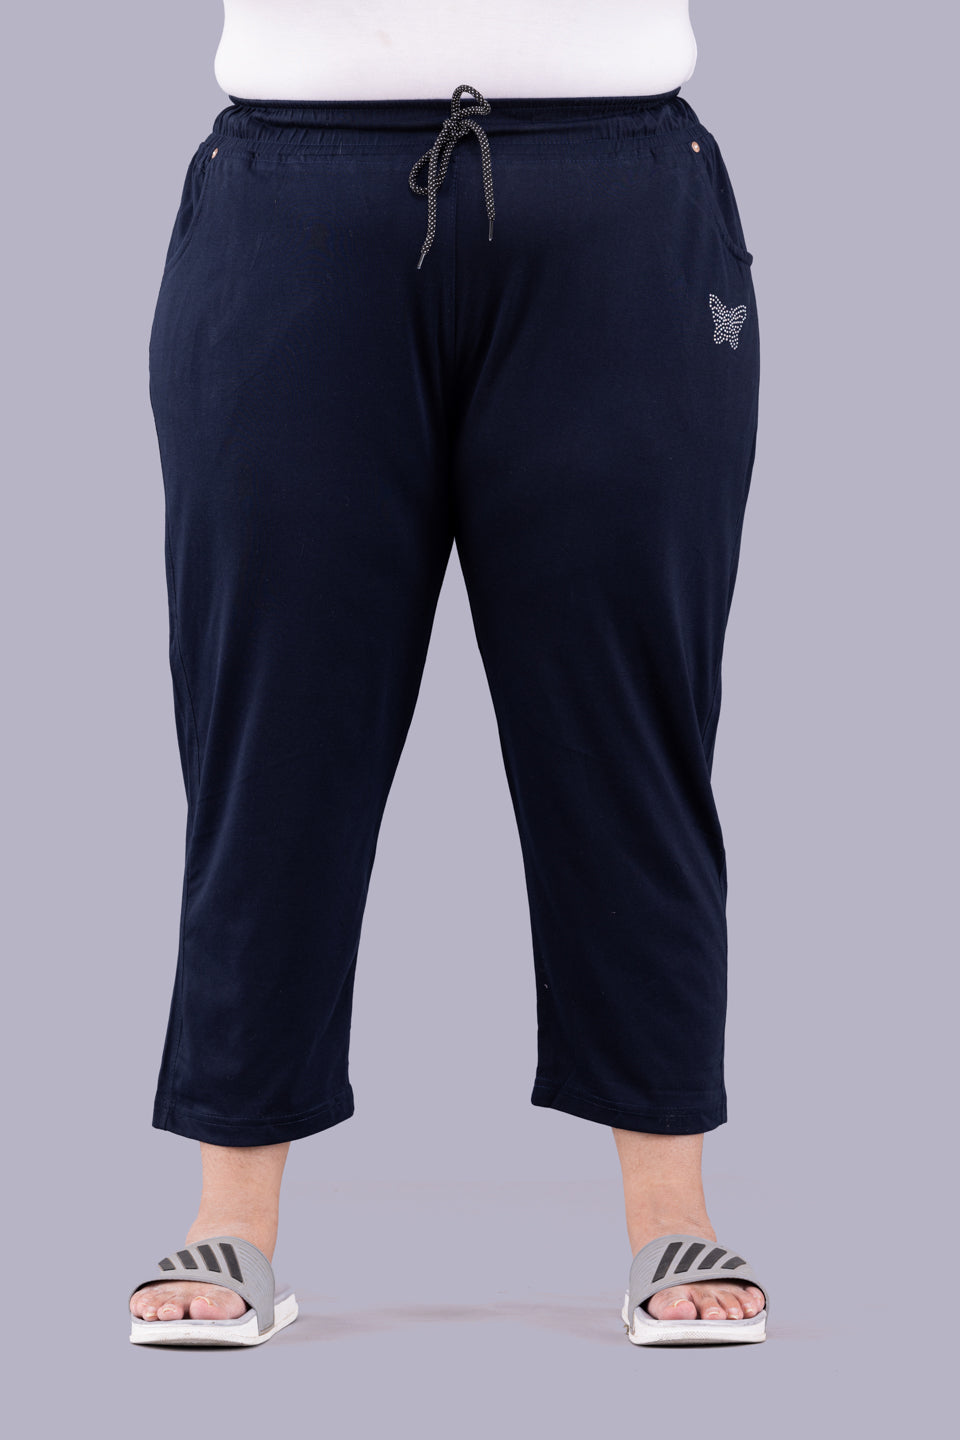 Buy Comfy Navy Blue Half Cotton Capri Pants For Women Online In India By  Cupidclothing's – Cupid Clothings